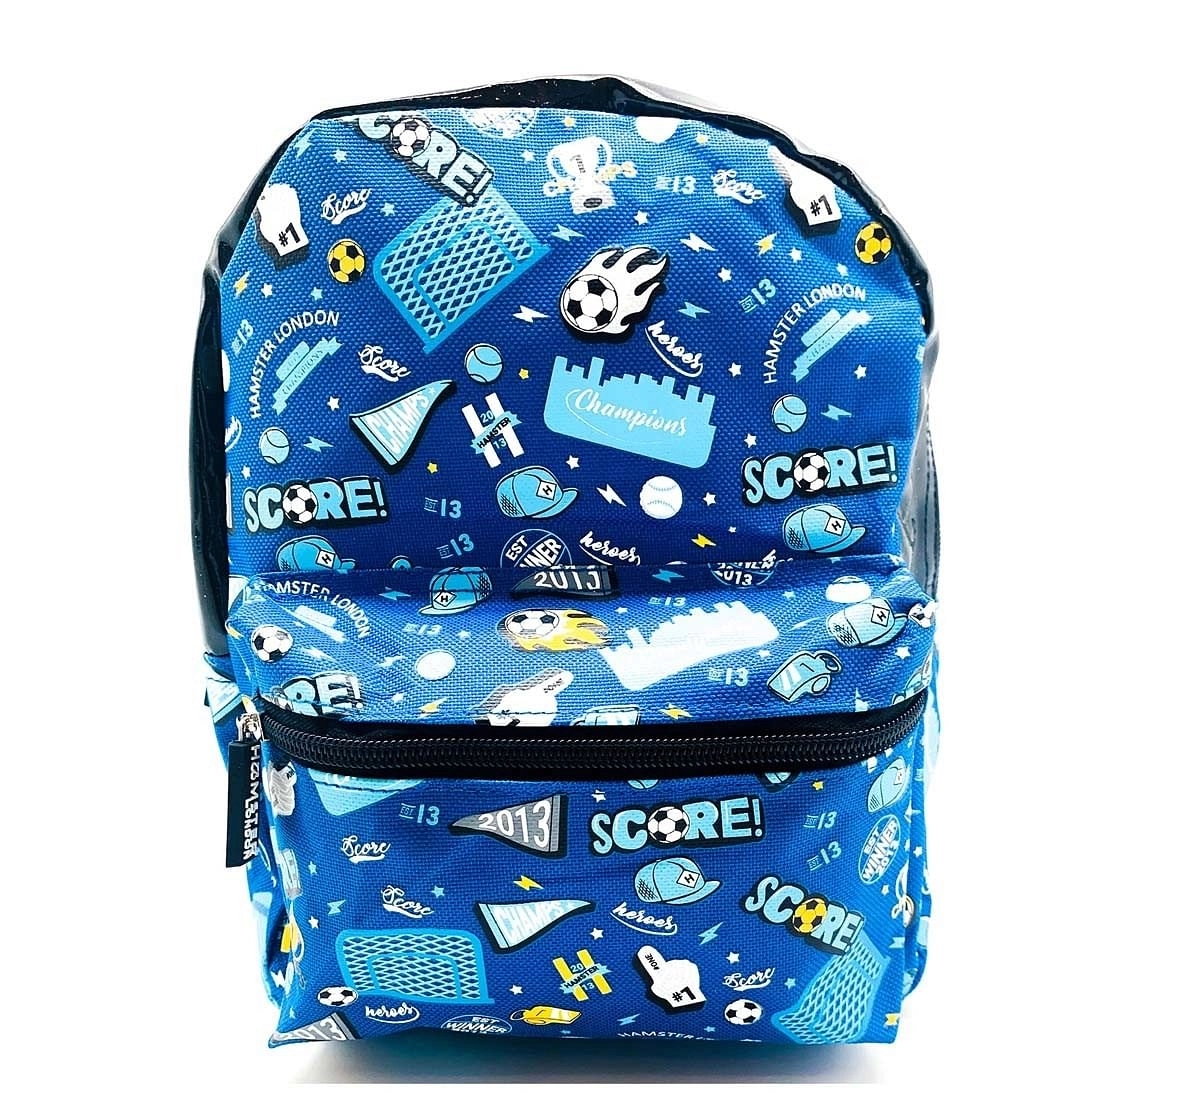 Hamster London Straight Fire Backpack Small Football Bags for Age 3Y+ (Blue)